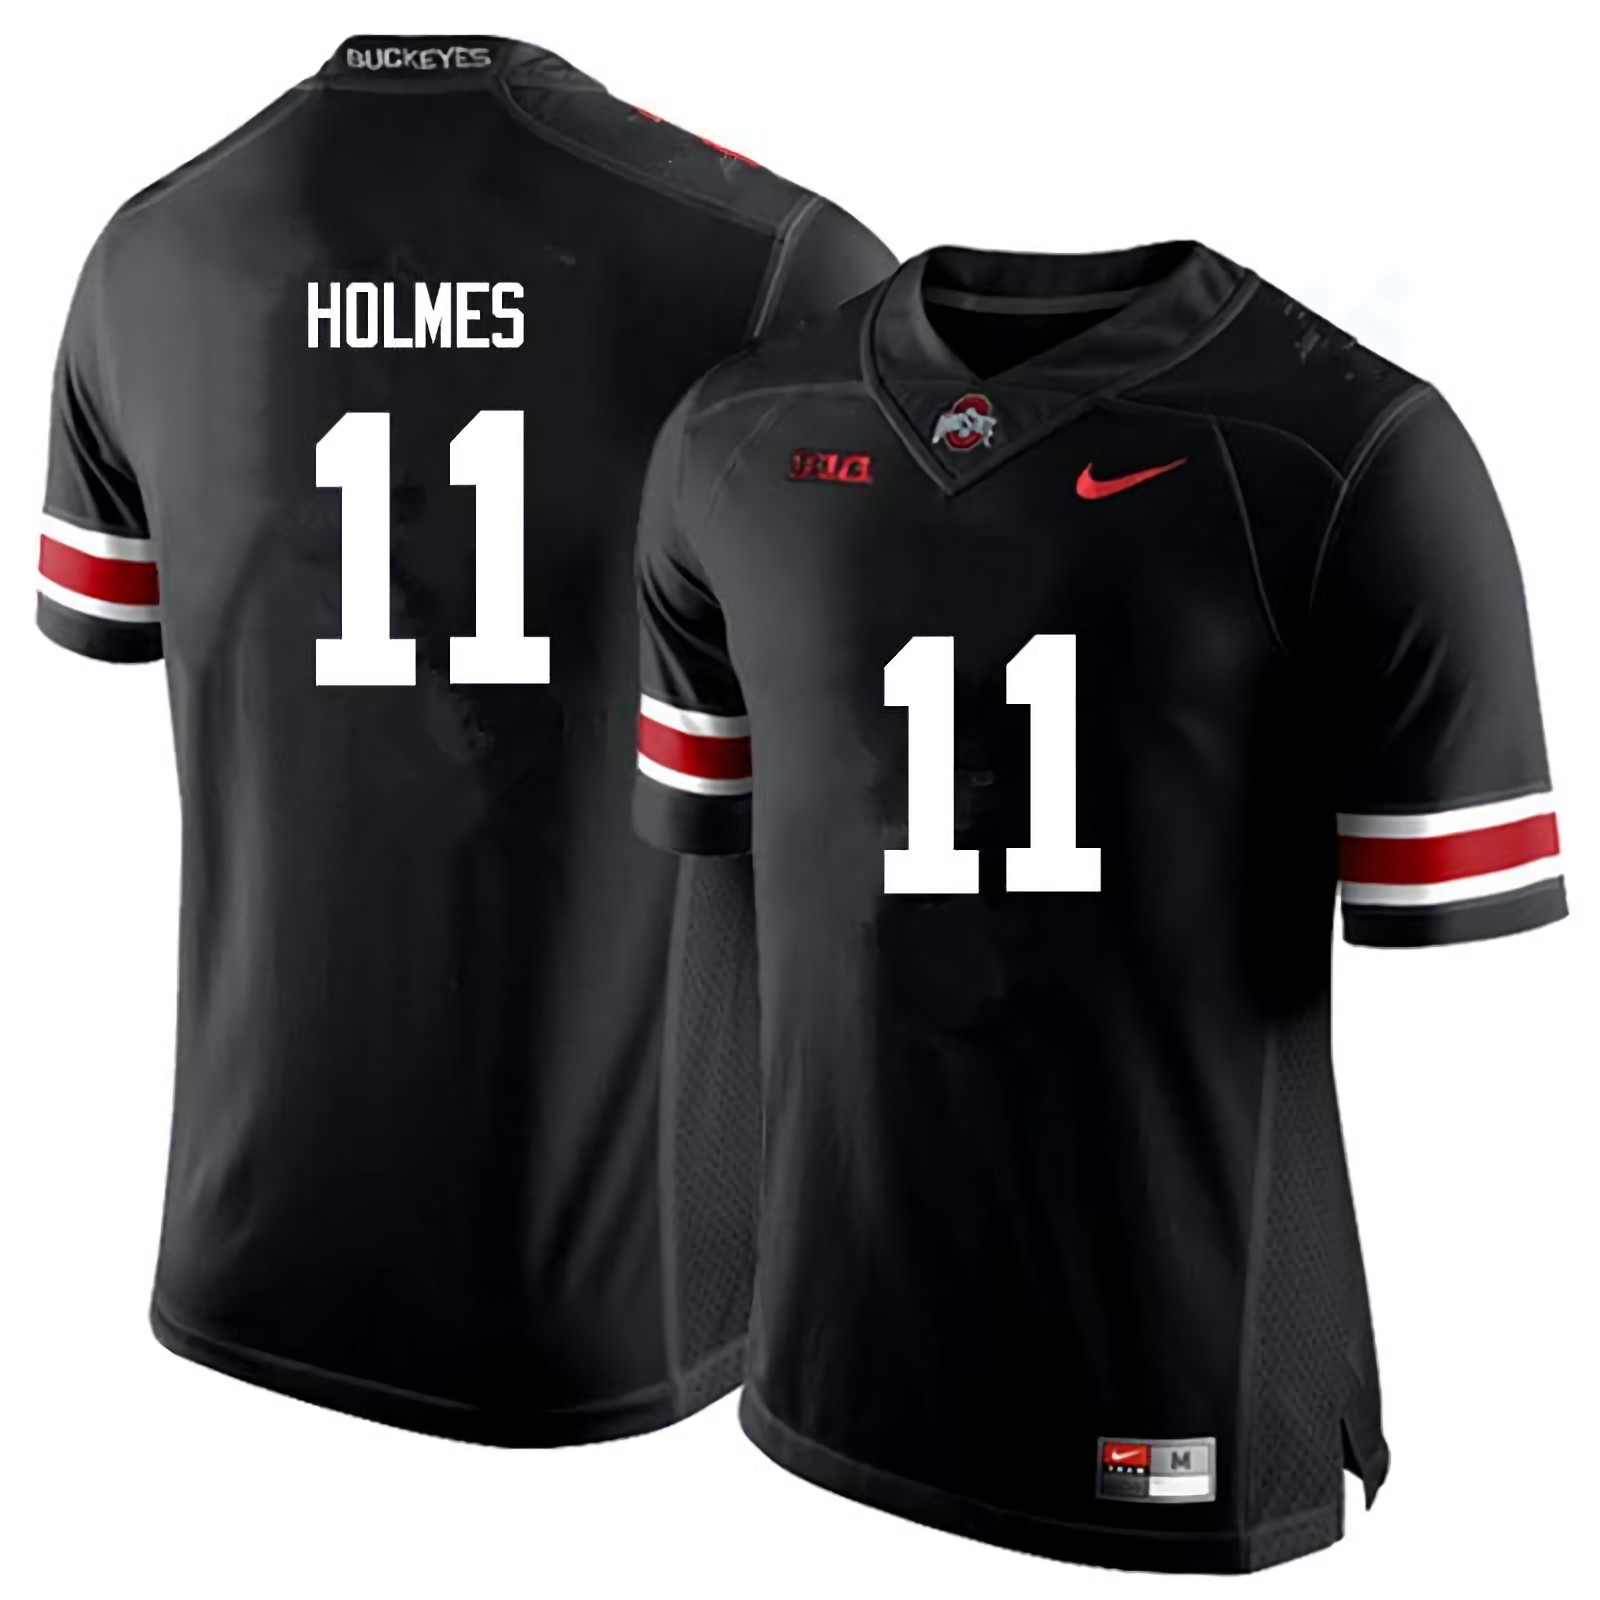 Jalyn Holmes Ohio State Buckeyes Men's NCAA #11 Nike Black College Stitched Football Jersey HVW5856OH